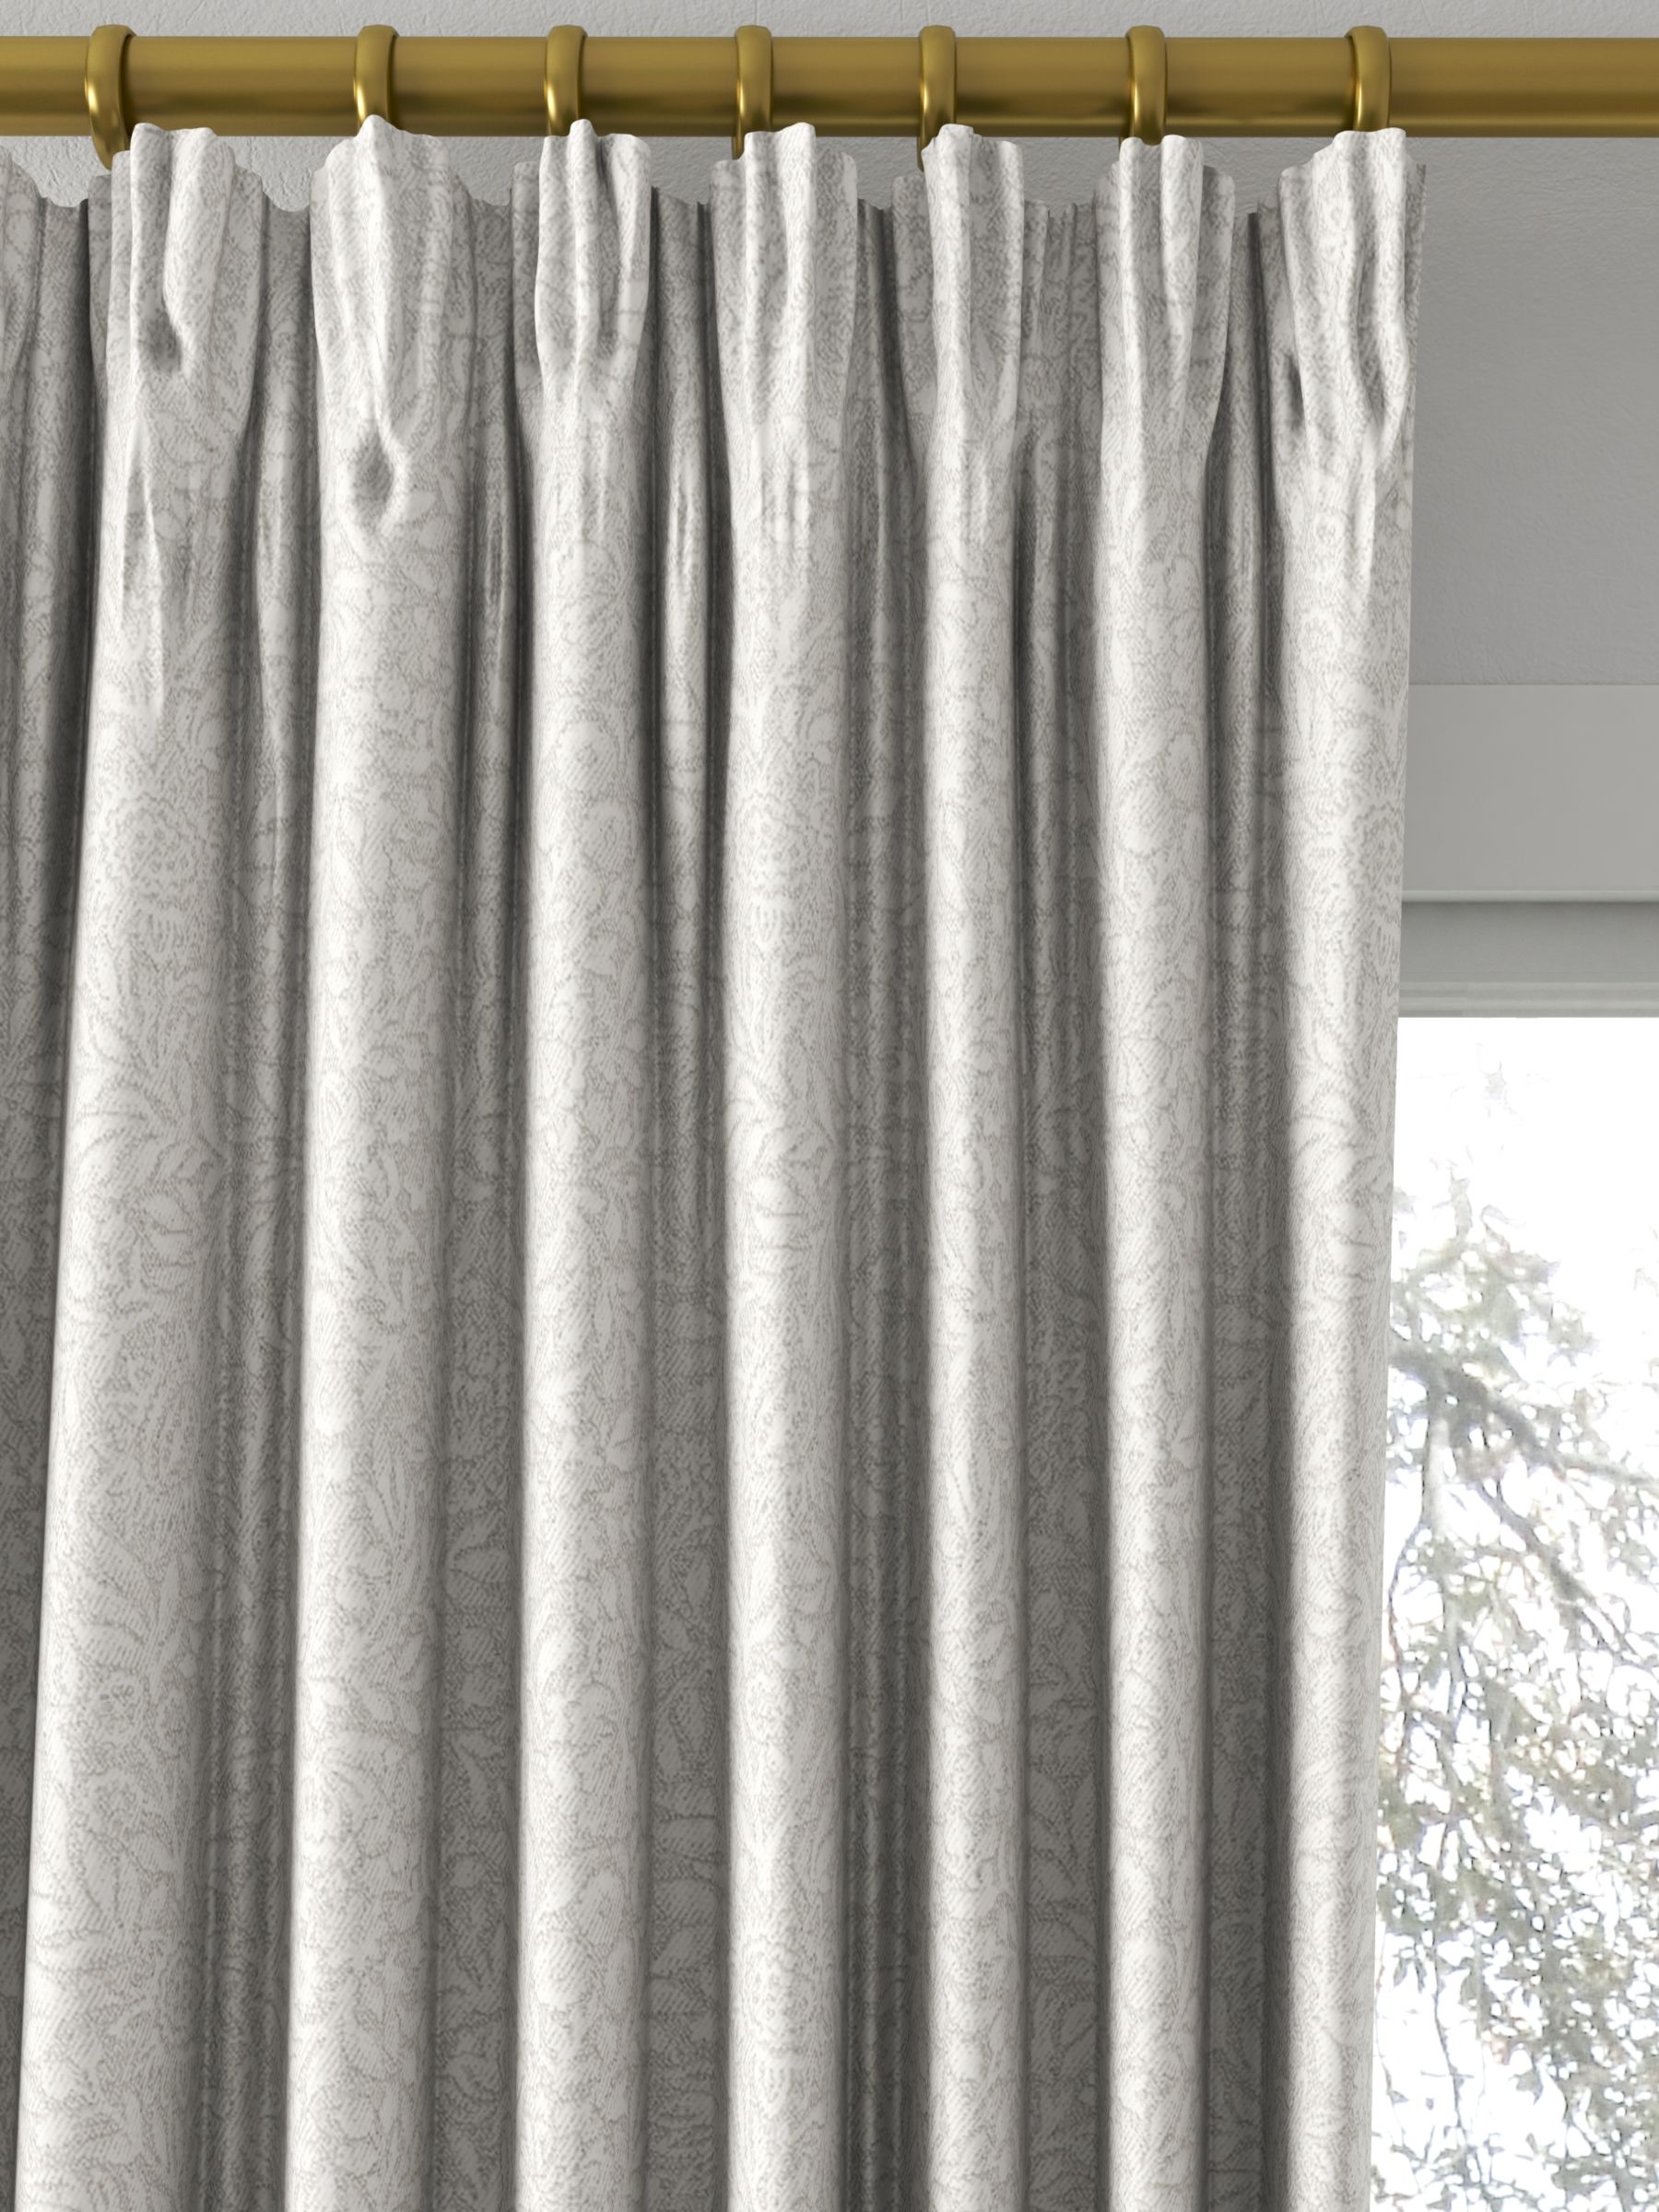 John Lewis Hidcote Weave Made to Measure Curtains, Dove